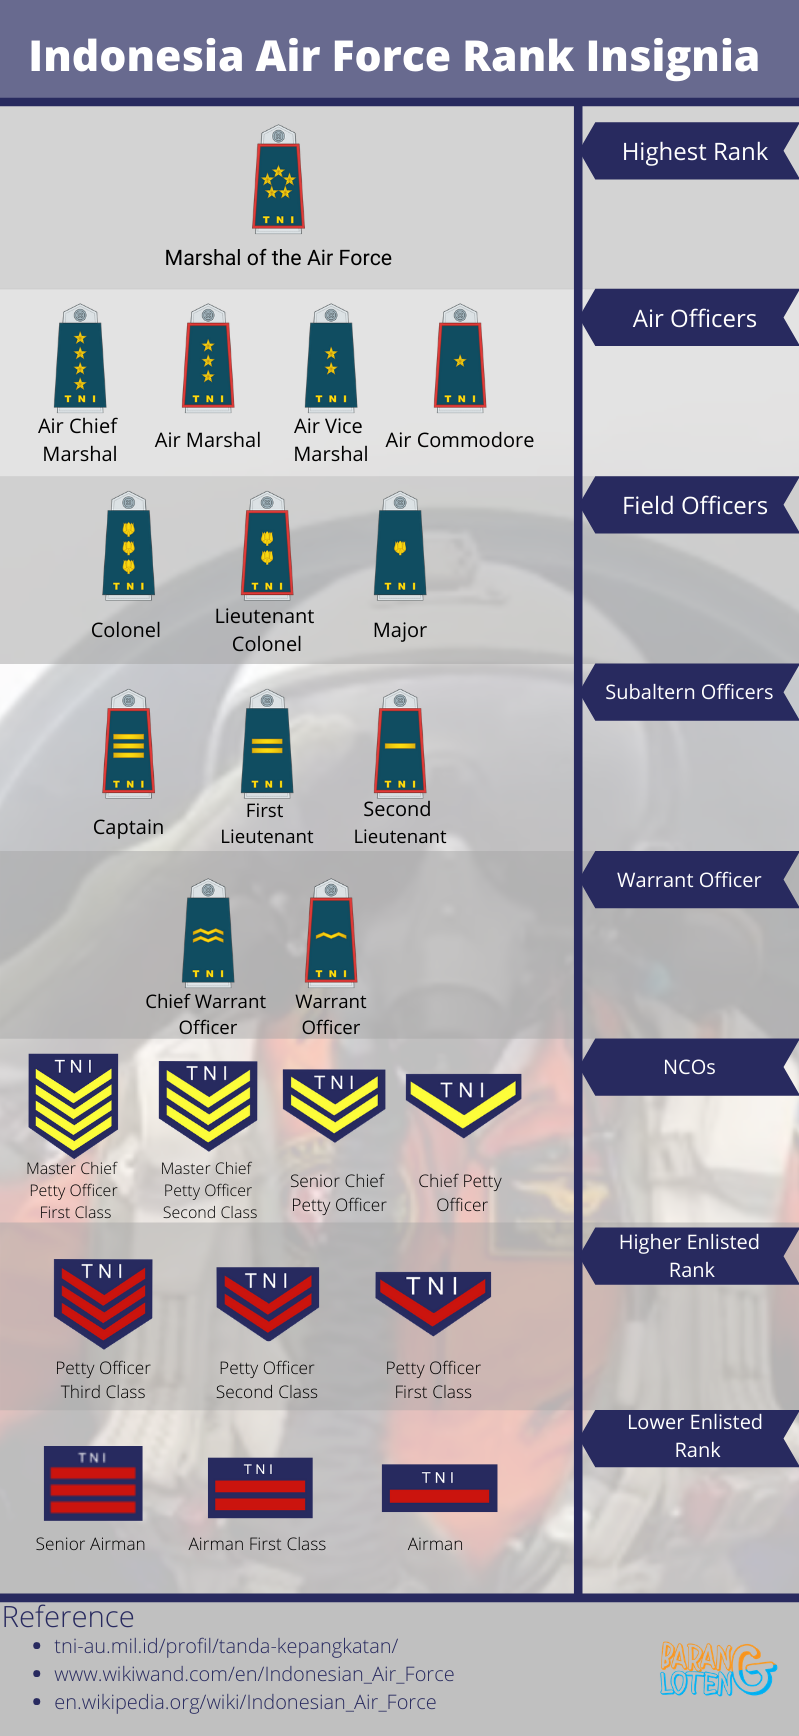 Indonesia Air Force Rank Insignia